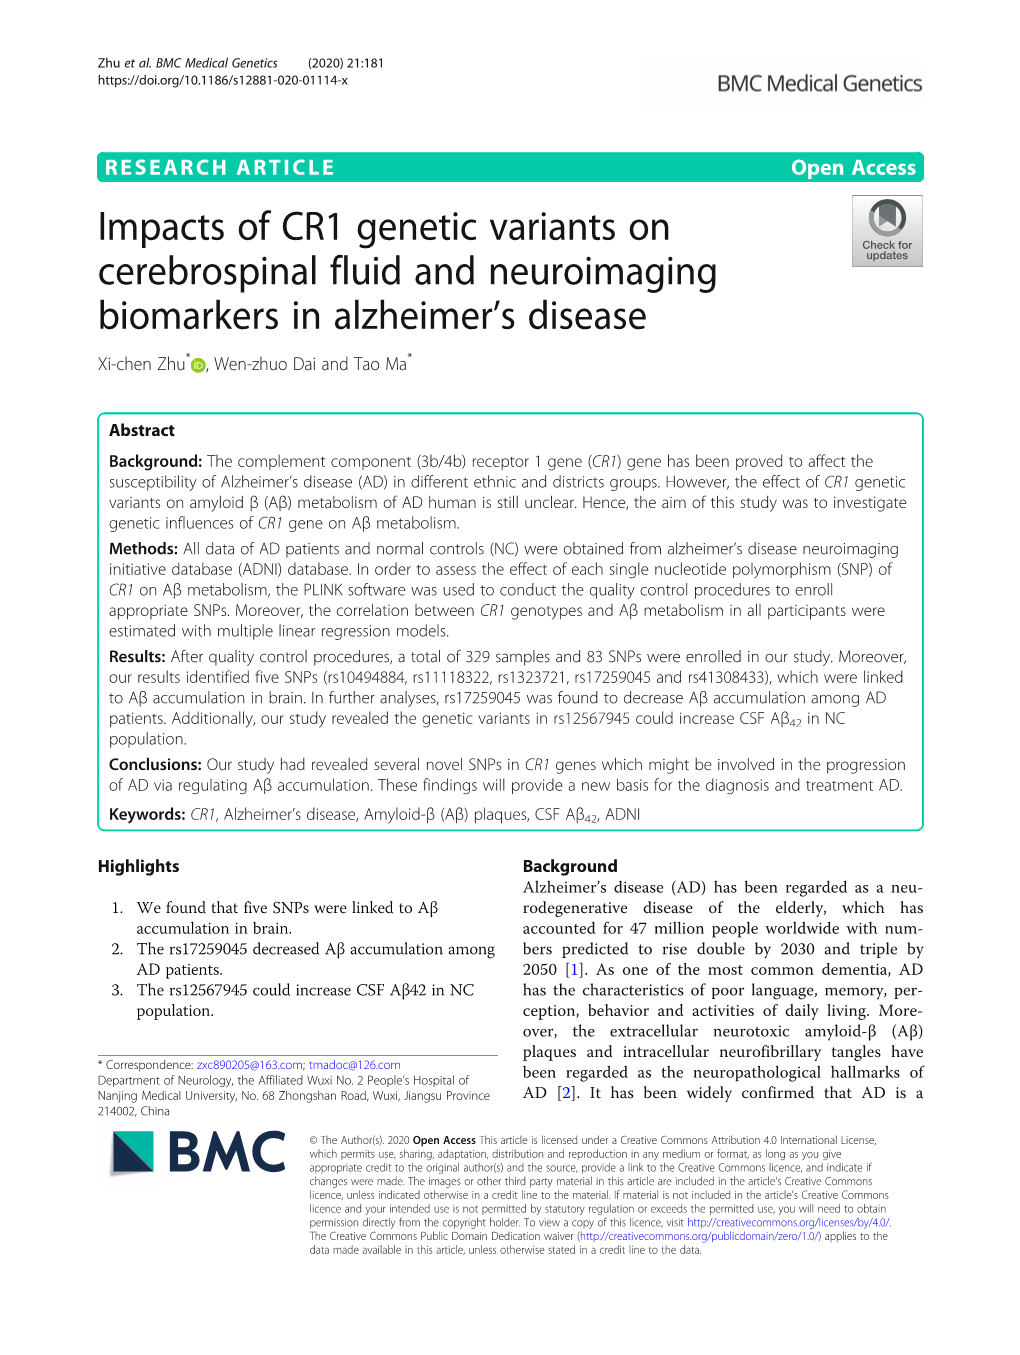 Impacts of CR1 Genetic Variants on Cerebrospinal Fluid and Neuroimaging Biomarkers in Alzheimer’S Disease Xi-Chen Zhu* , Wen-Zhuo Dai and Tao Ma*